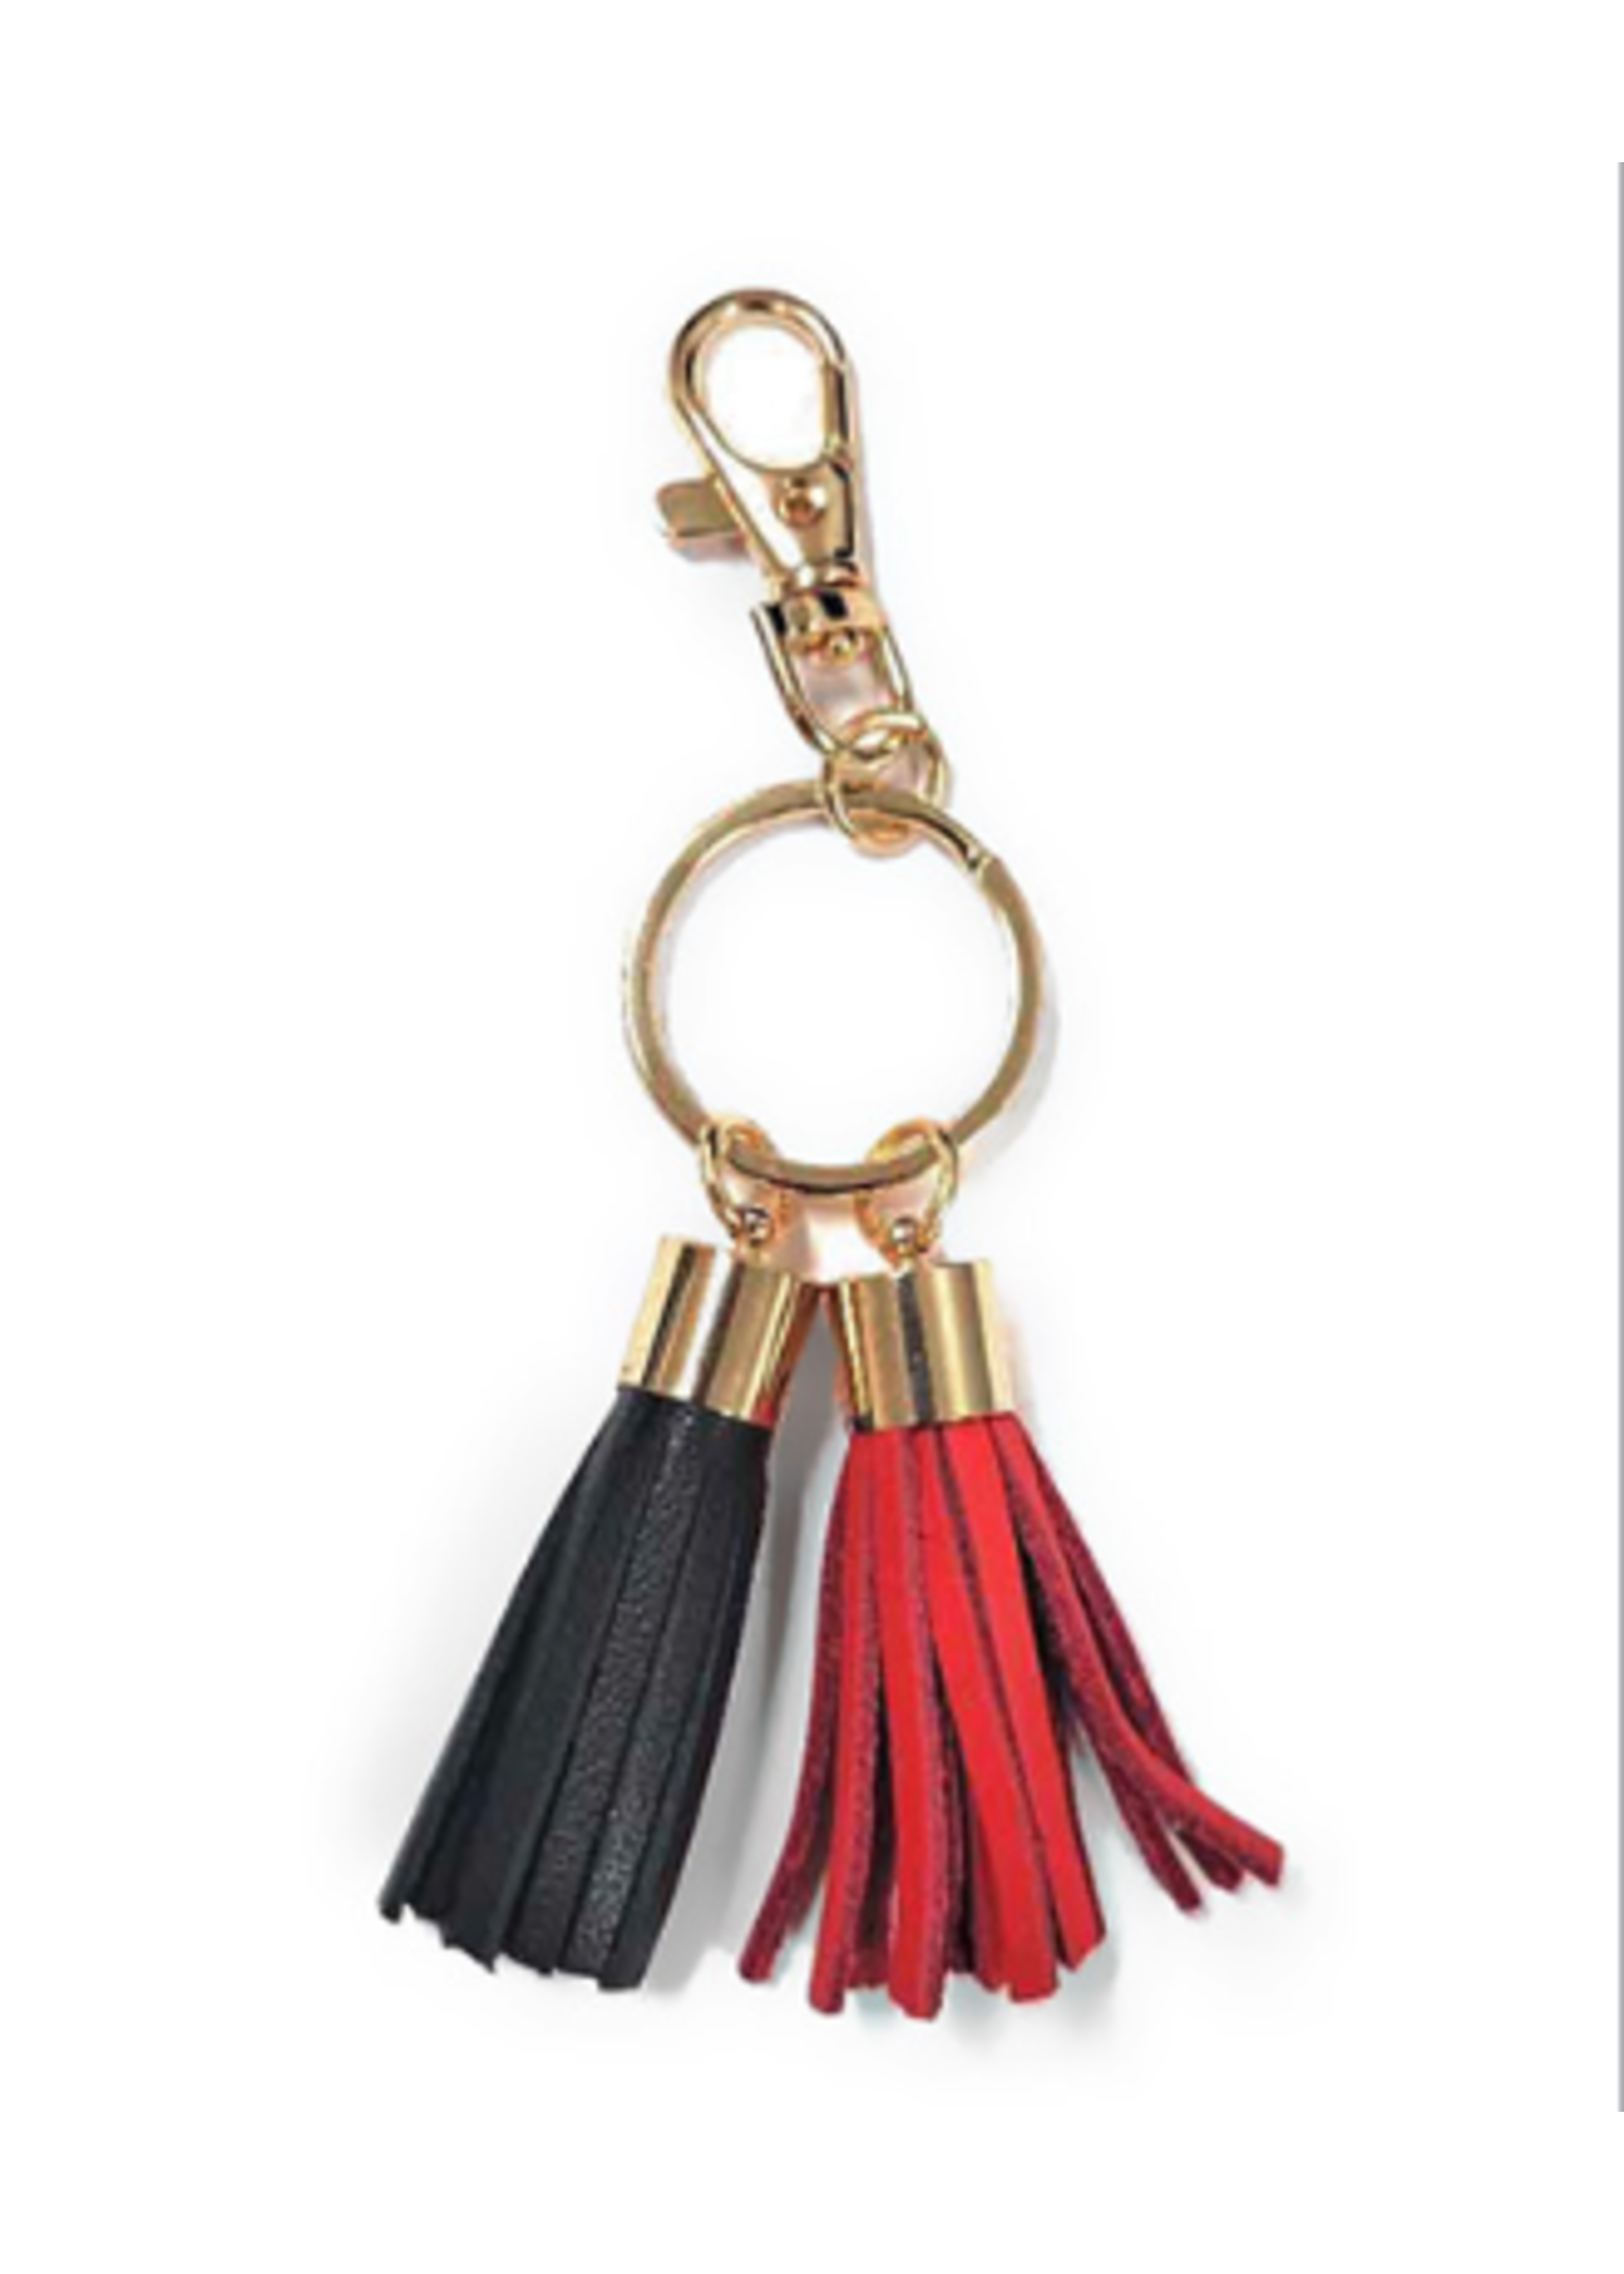 Two-Tone Tassely Key Chain